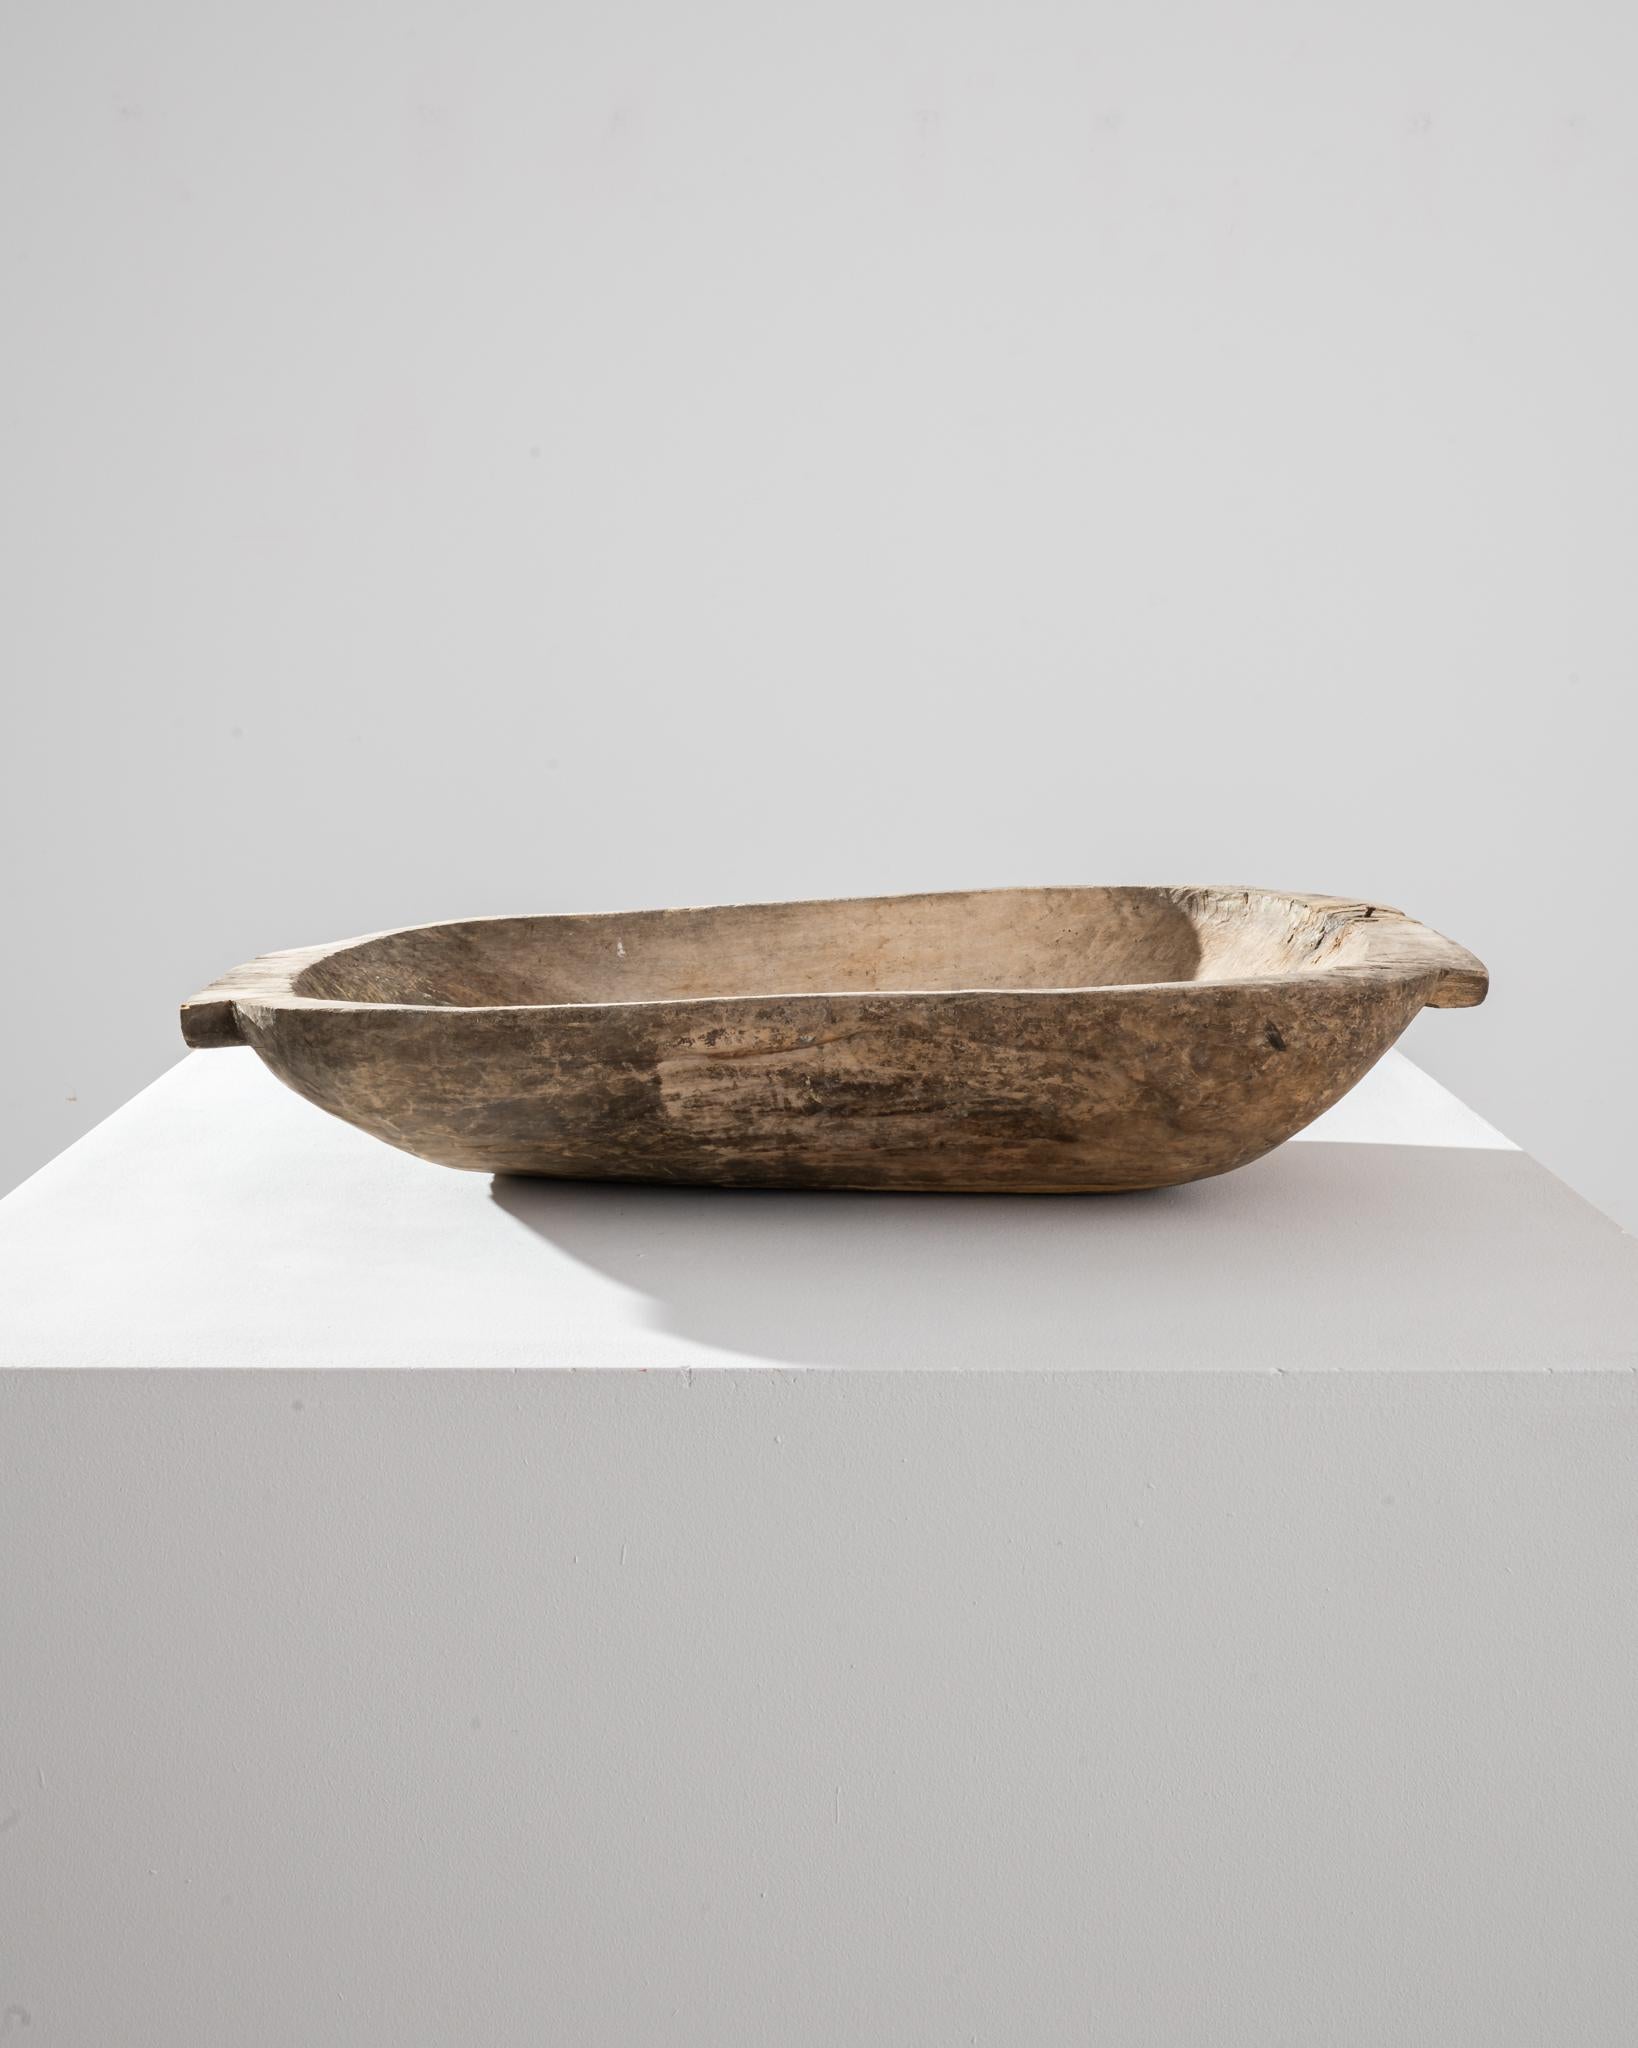 The simple form and tactile surface of this wooden bowl give it a timeless appeal. Made in Central Europe in the 1800s, the rough-hewn texture indicates that this piece was carved by hand from a single piece of wood, formerly used to store rising